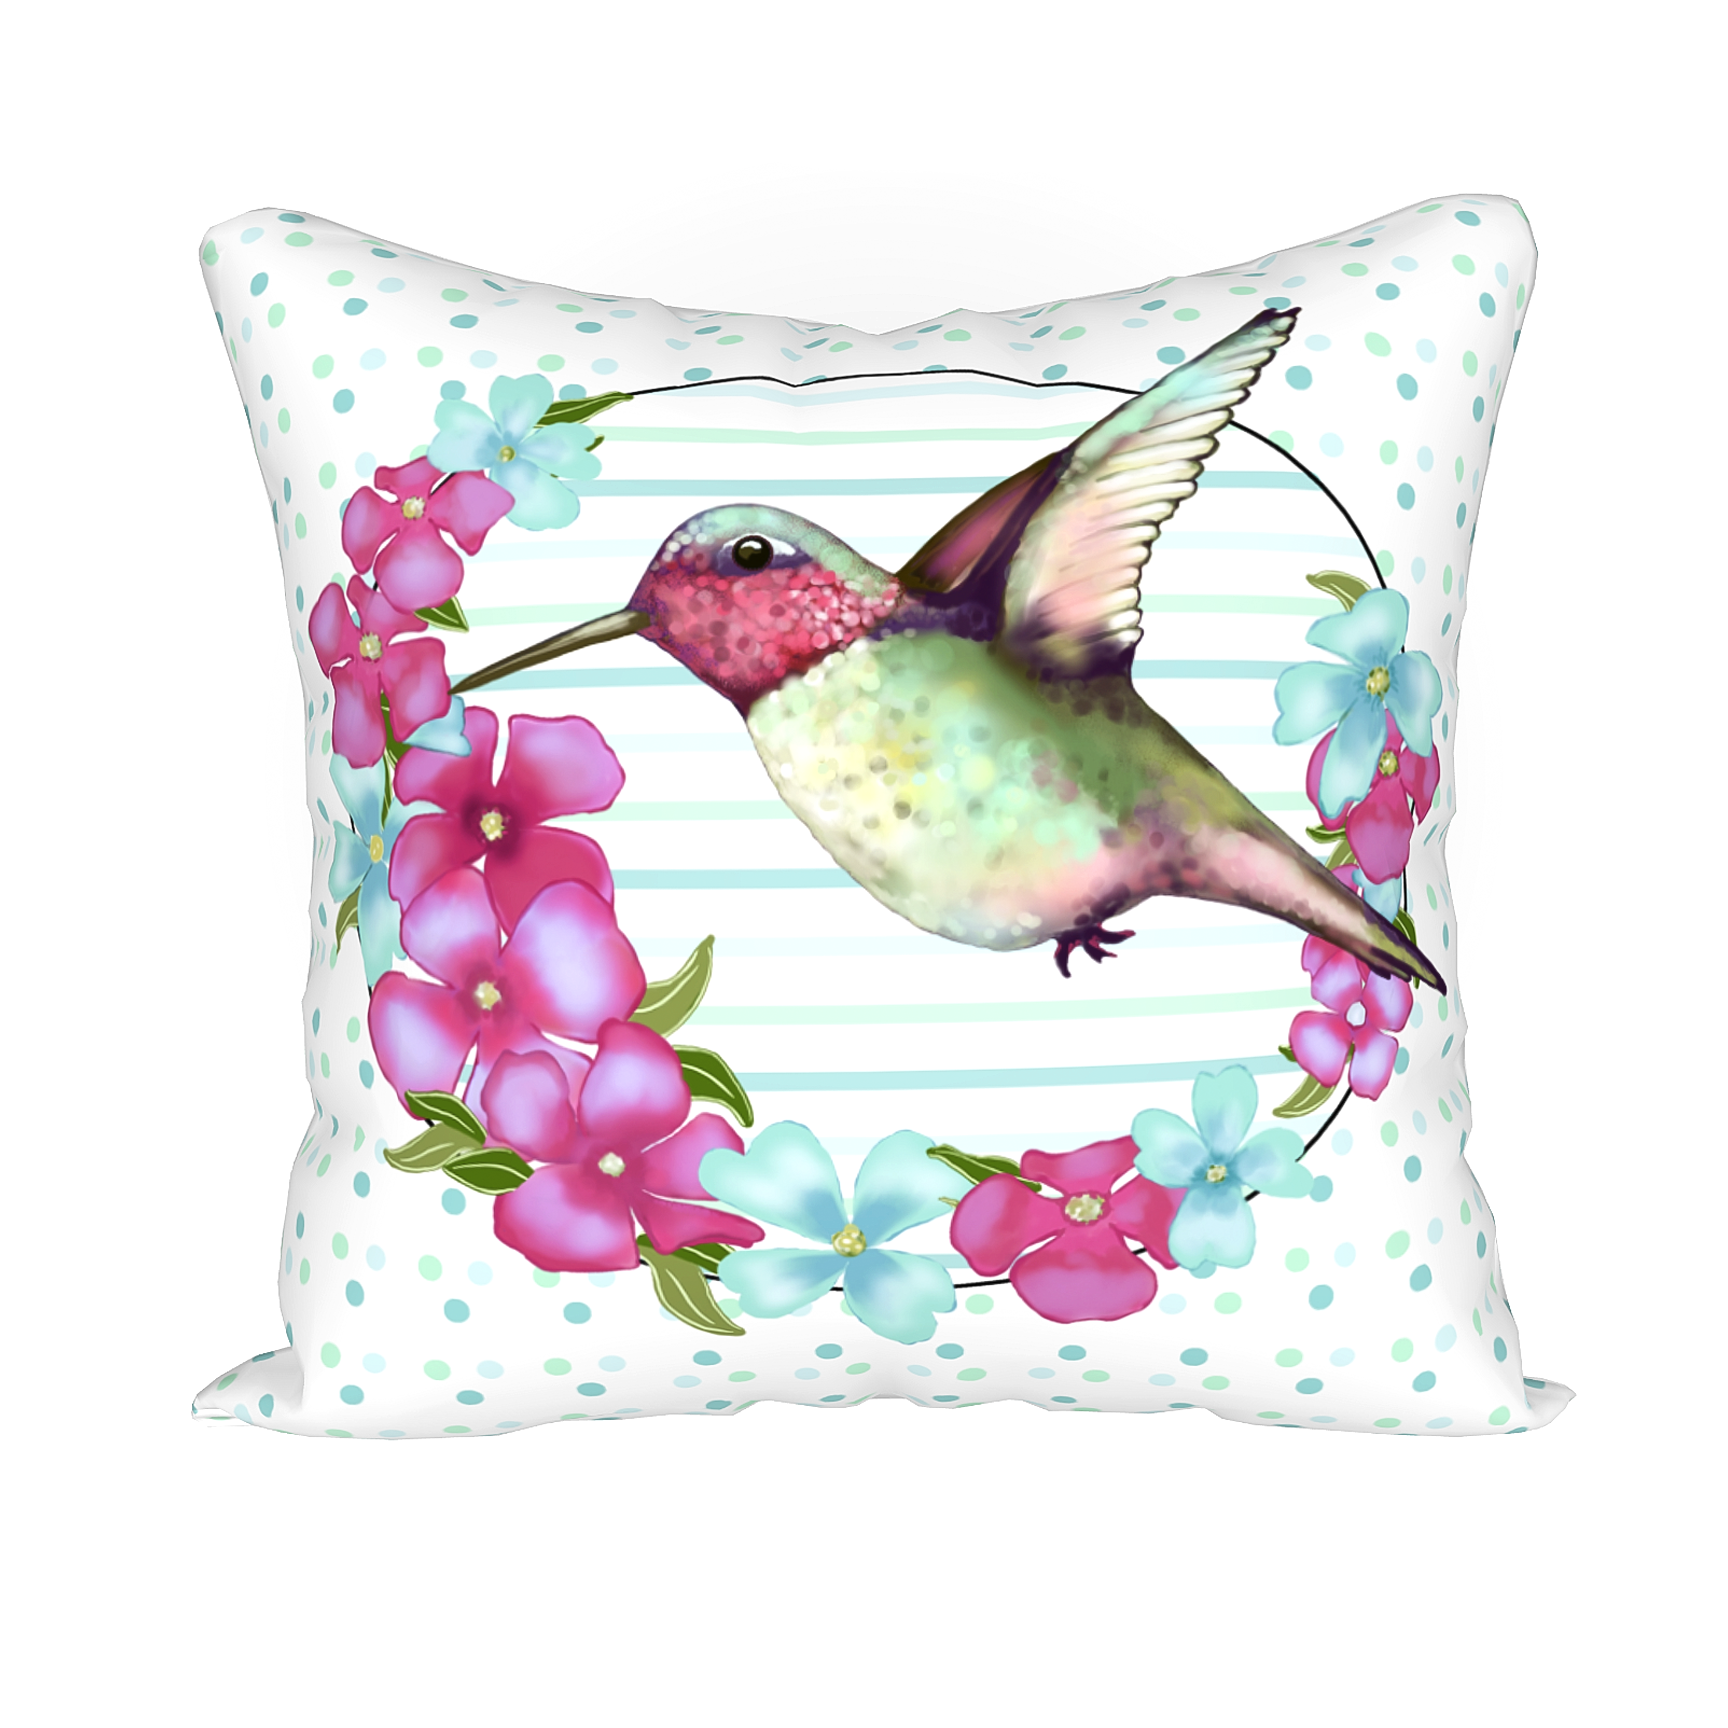 hummer pillow etsy copy.png